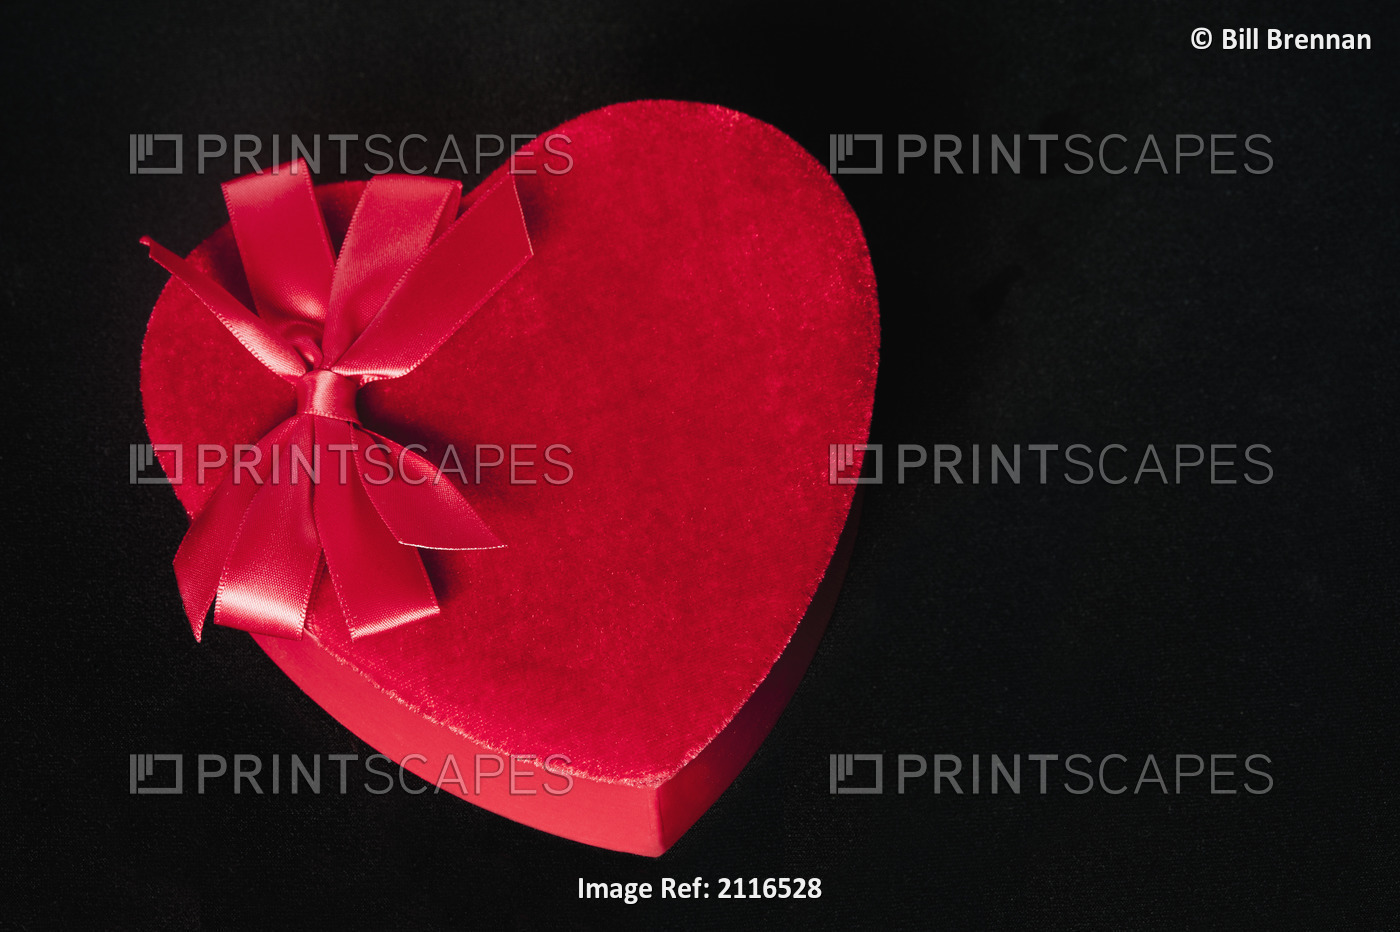 Valentines heart-shaped candy box against black background.